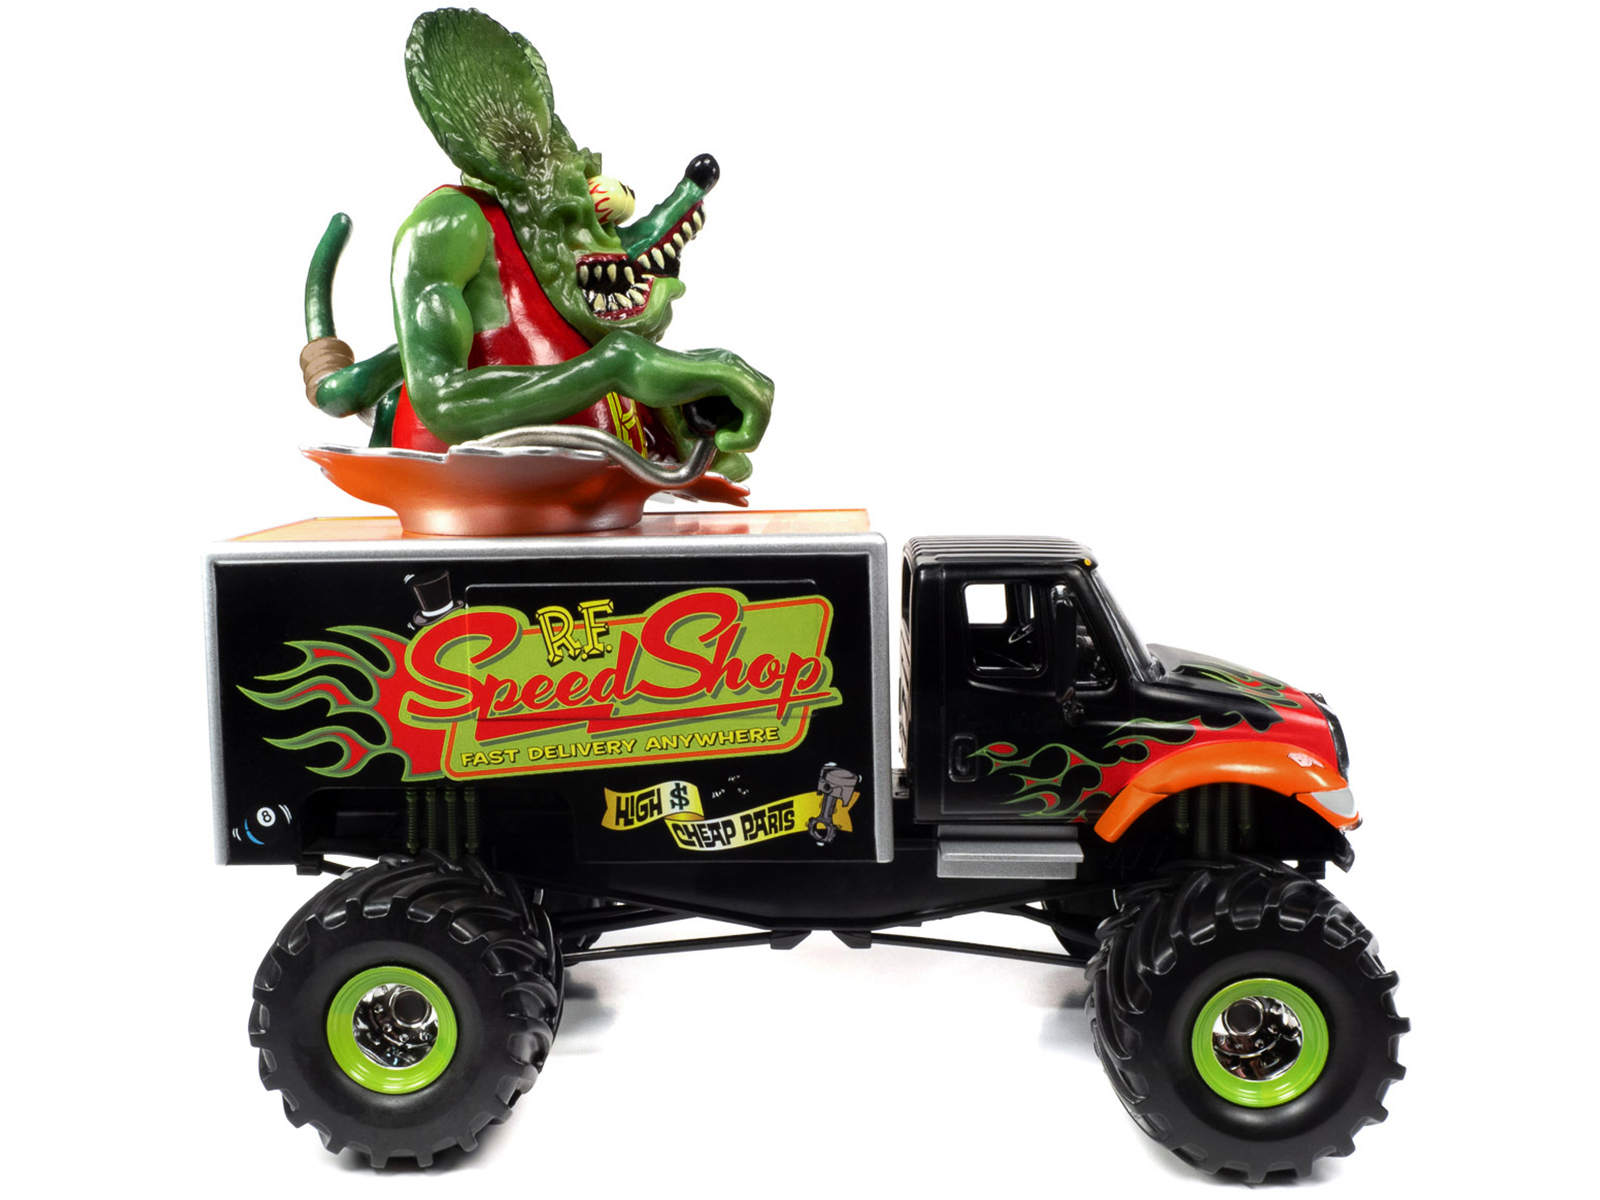 Primary image for International 4400 Monster Truck Matt Black with Flames and Rat Fink Figure Atta